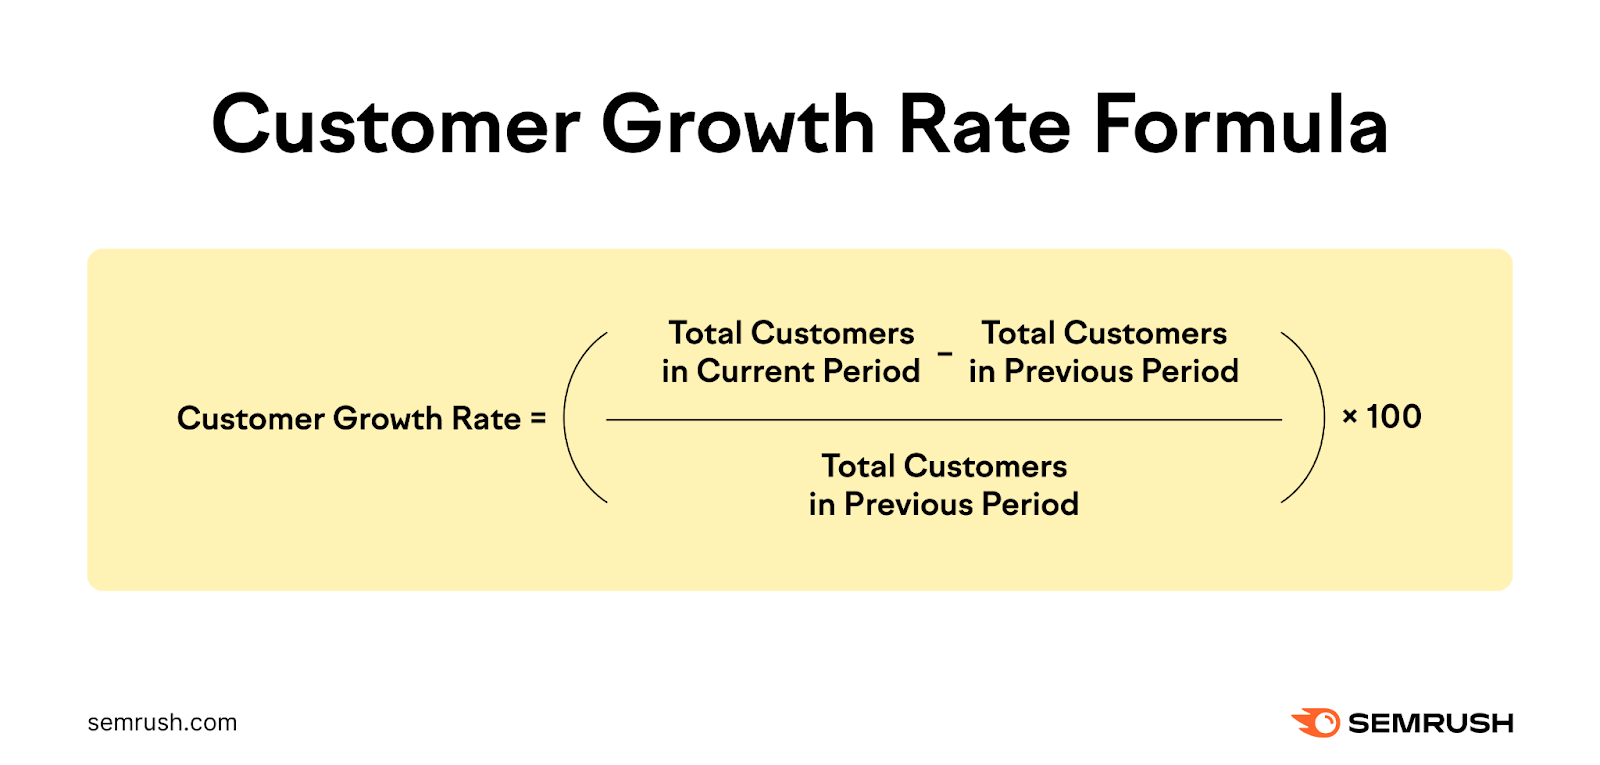 Customer growth rate equals total customers in current period minus total customers in previous period divided by total customers in previous period, multiplied by 100.